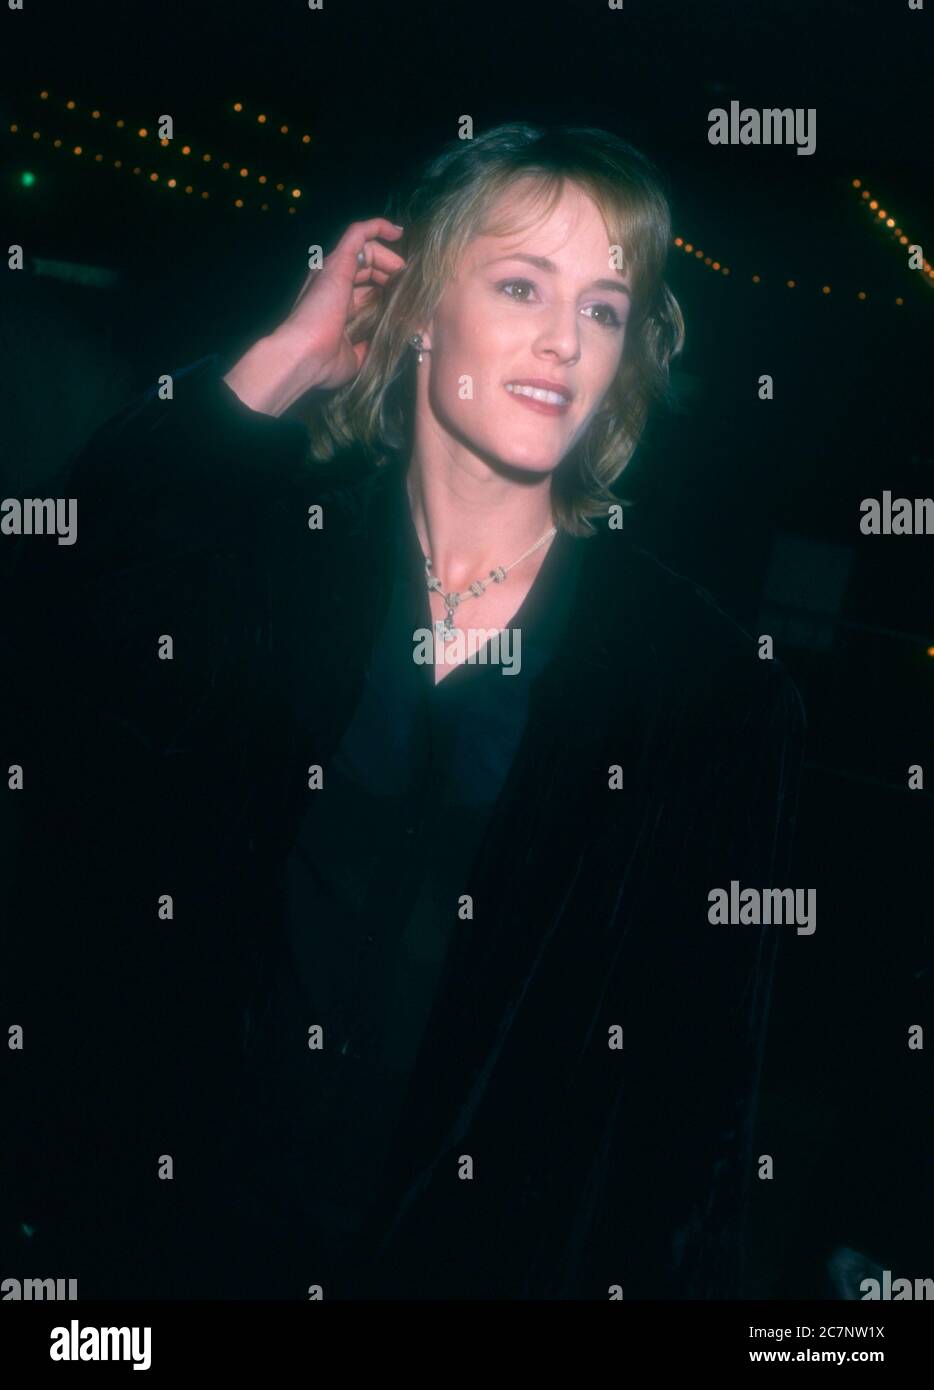 Century City, California, USA 18th January 1996 Actress Mary Stuart Masterson attends New Line Cinema's 'Bed of Roses' Premiere on January 18, 1996 at Cineplex Odeon Century Plaza Cinemas in Century City, California, USA. Photo by Barry King/Alamy Stock Photo Stock Photo